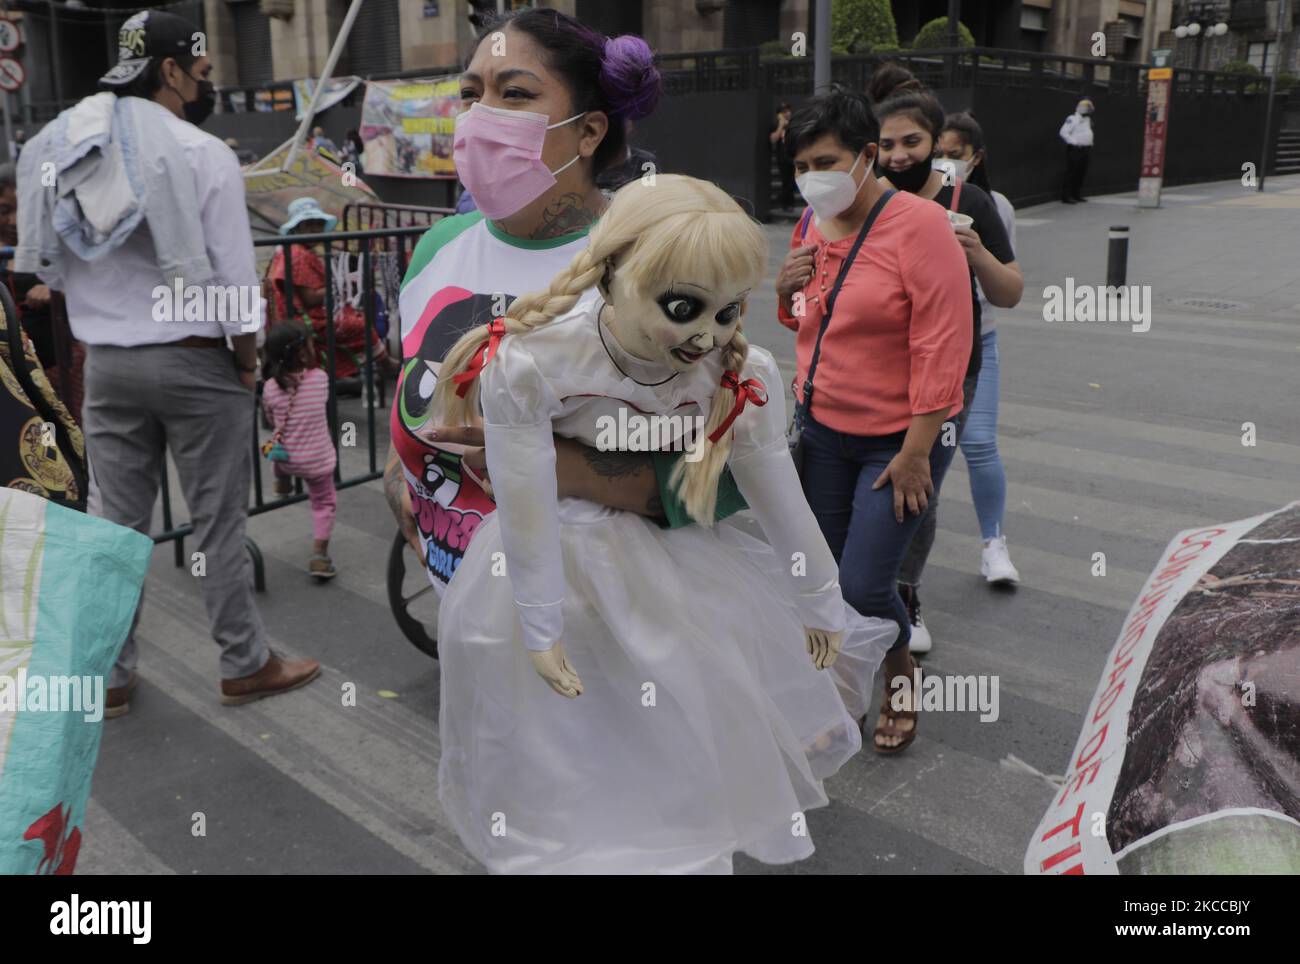 A woman carries a doll of the horror movie character Annabelle in the main square of Mexico City's Zócalo, Mexico, on April 6, 2021 during the COVID-19 health emergency and the orange epidemiological traffic light in the capital. Mexico is the thirteenth most infected country in the world and has the third highest number of deaths due to the pandemic, behind the United States and Brazil, according to Johns Hopkins University. (Photo by Gerardo Vieyra/NurPhoto) Stock Photo